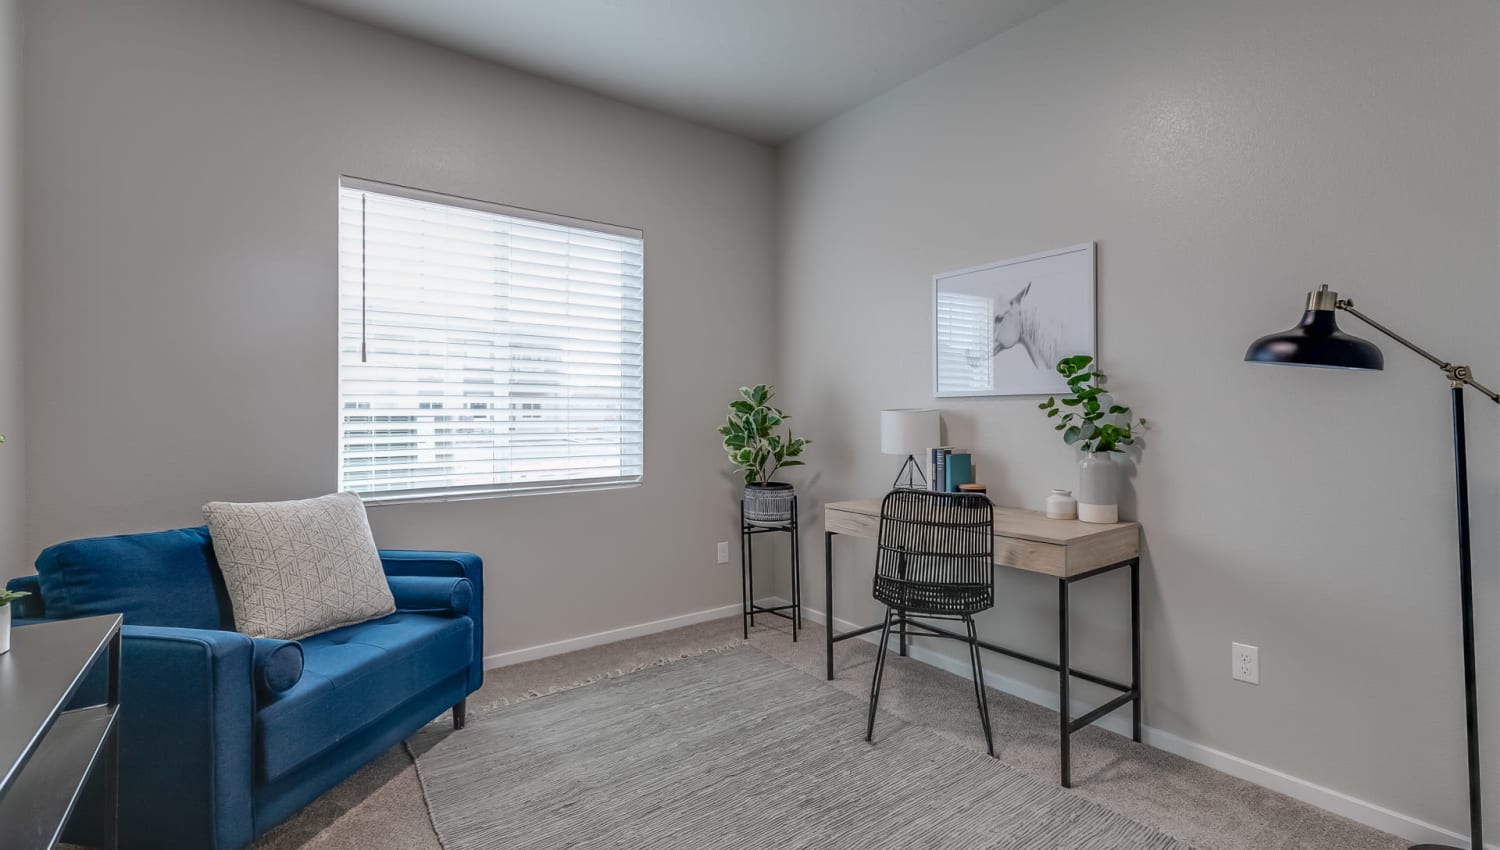 Home office set up in the second bedroom of a home at Olympus at Ten Mile in Meridian, Idaho